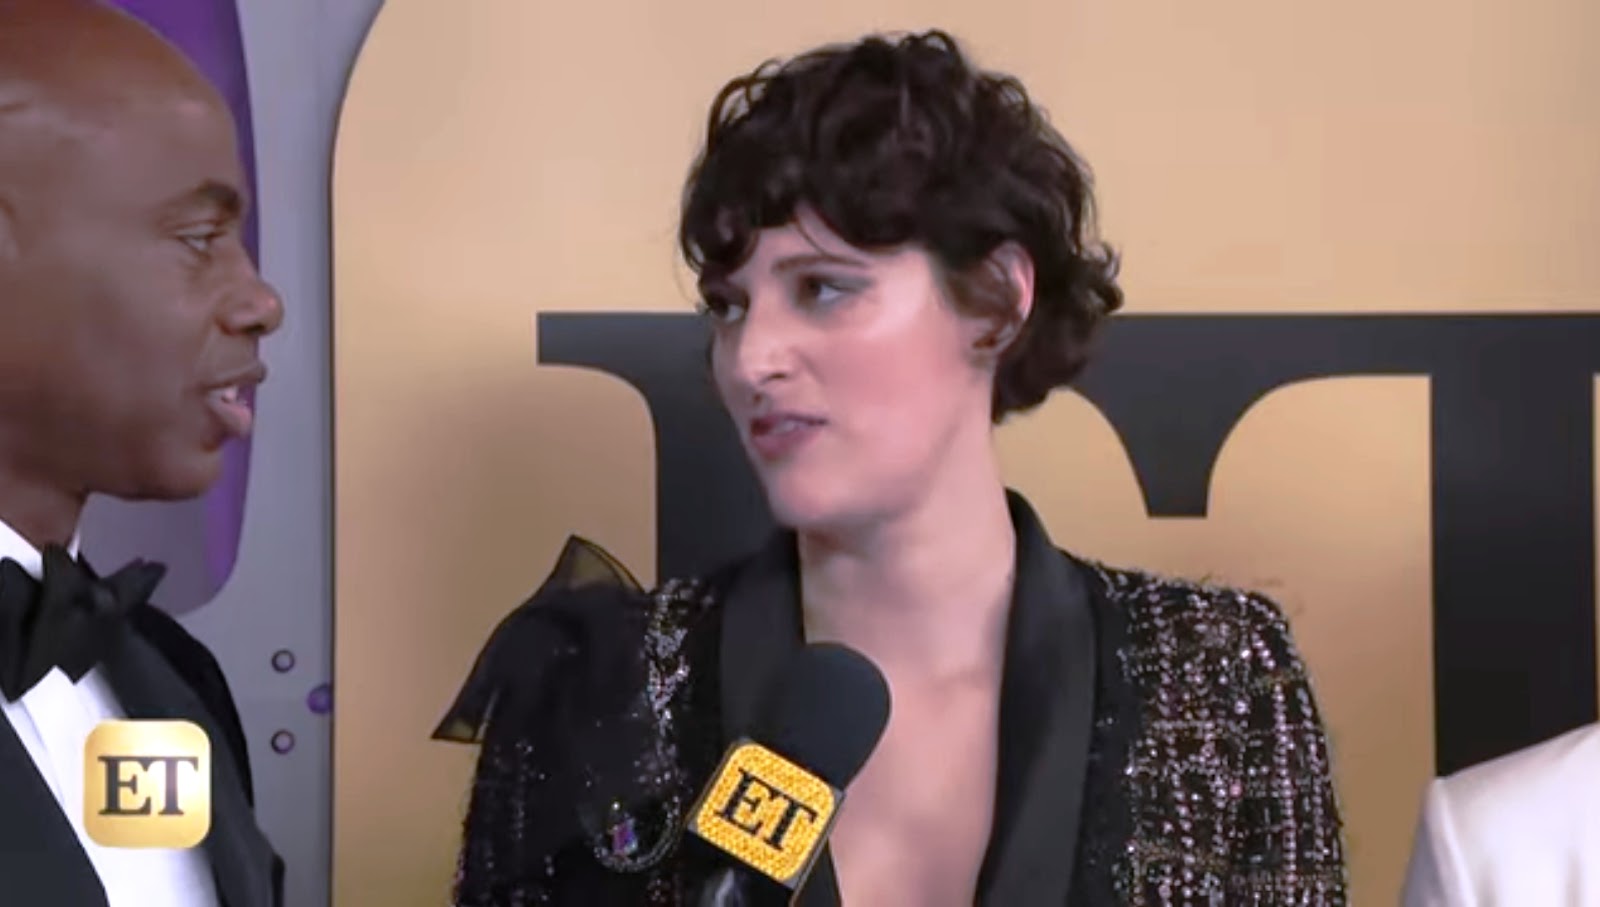 "He made a lot of things happen for a lot of people." Says Phoebe Waller-Bridge at the golden globes